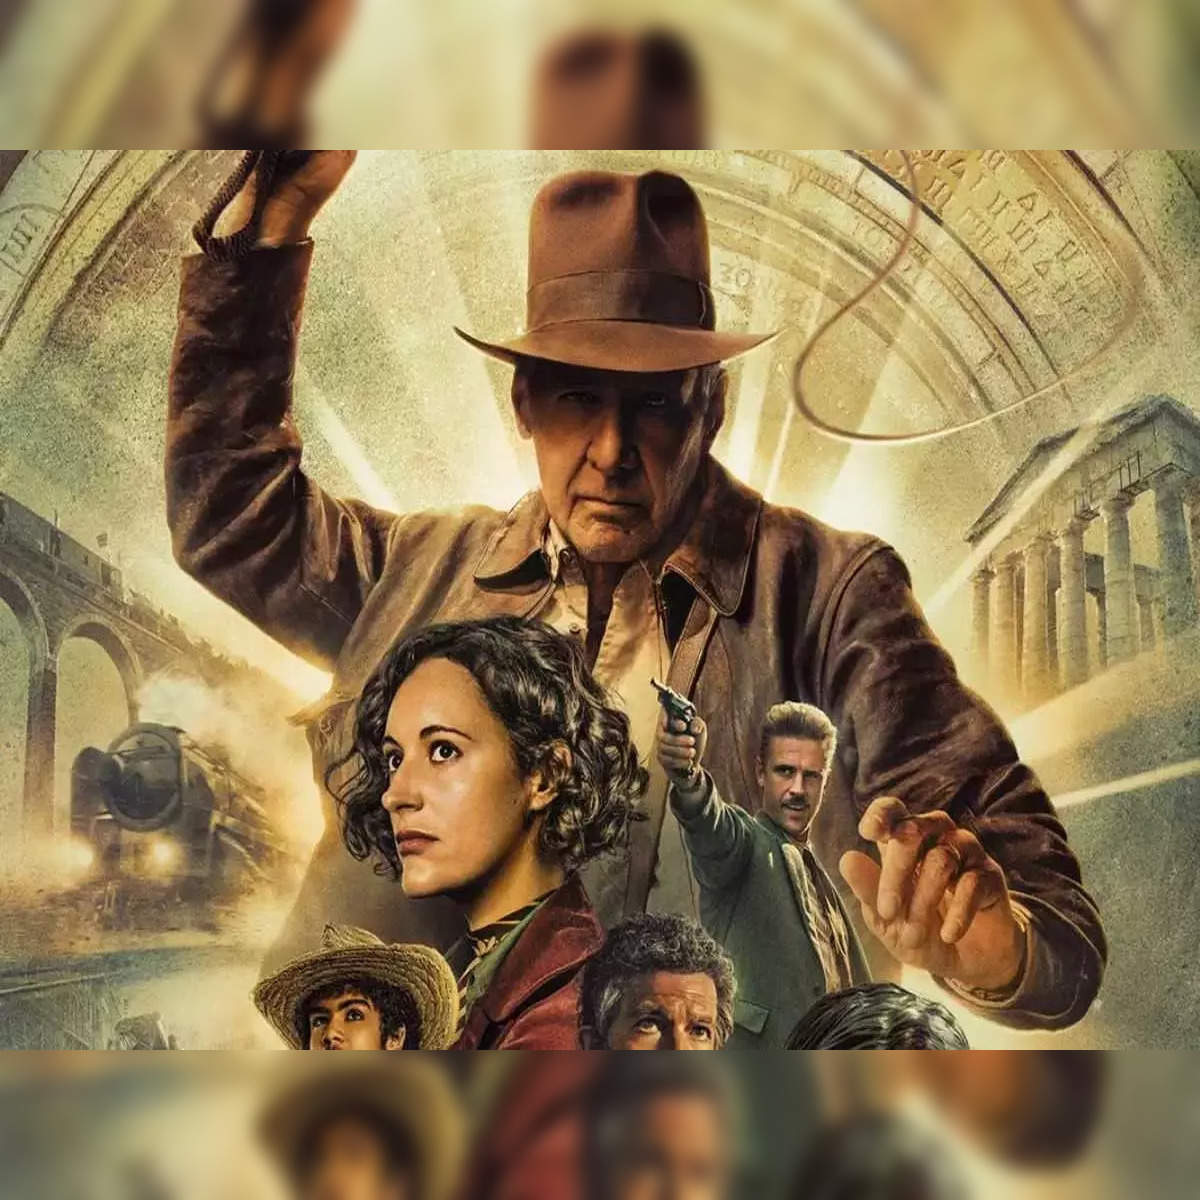 In devastating news, 'Indiana Jones and the Dial of Destiny' debuts